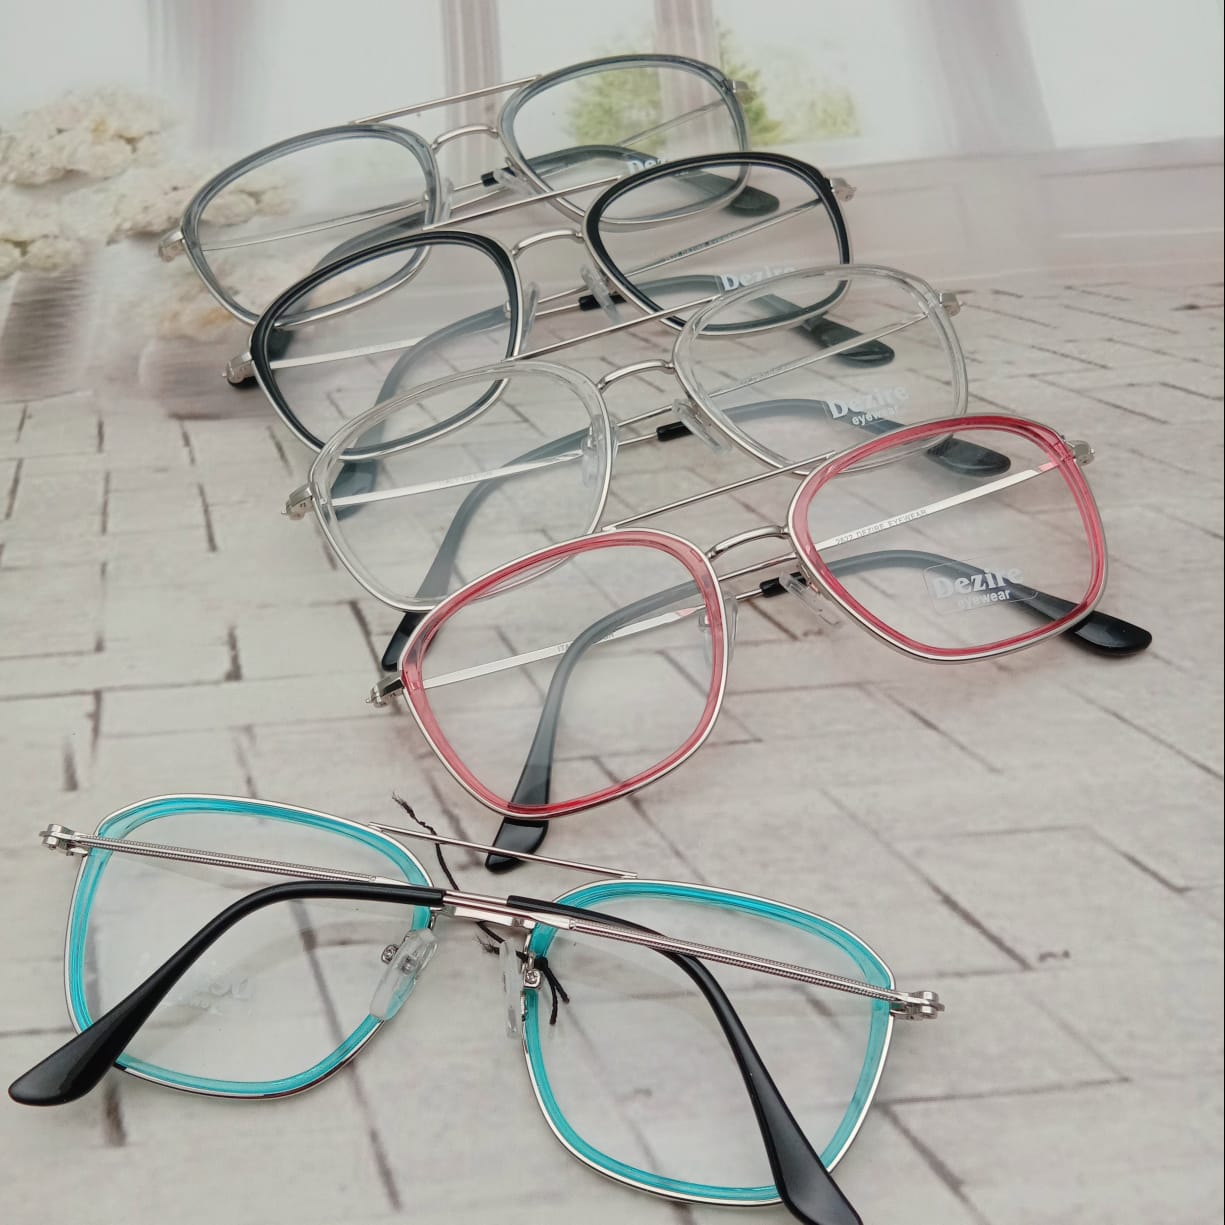 BEST OFFER -Only Rs1299: 2 pair of frame with fiber glasses with blue cut lances UV protect 